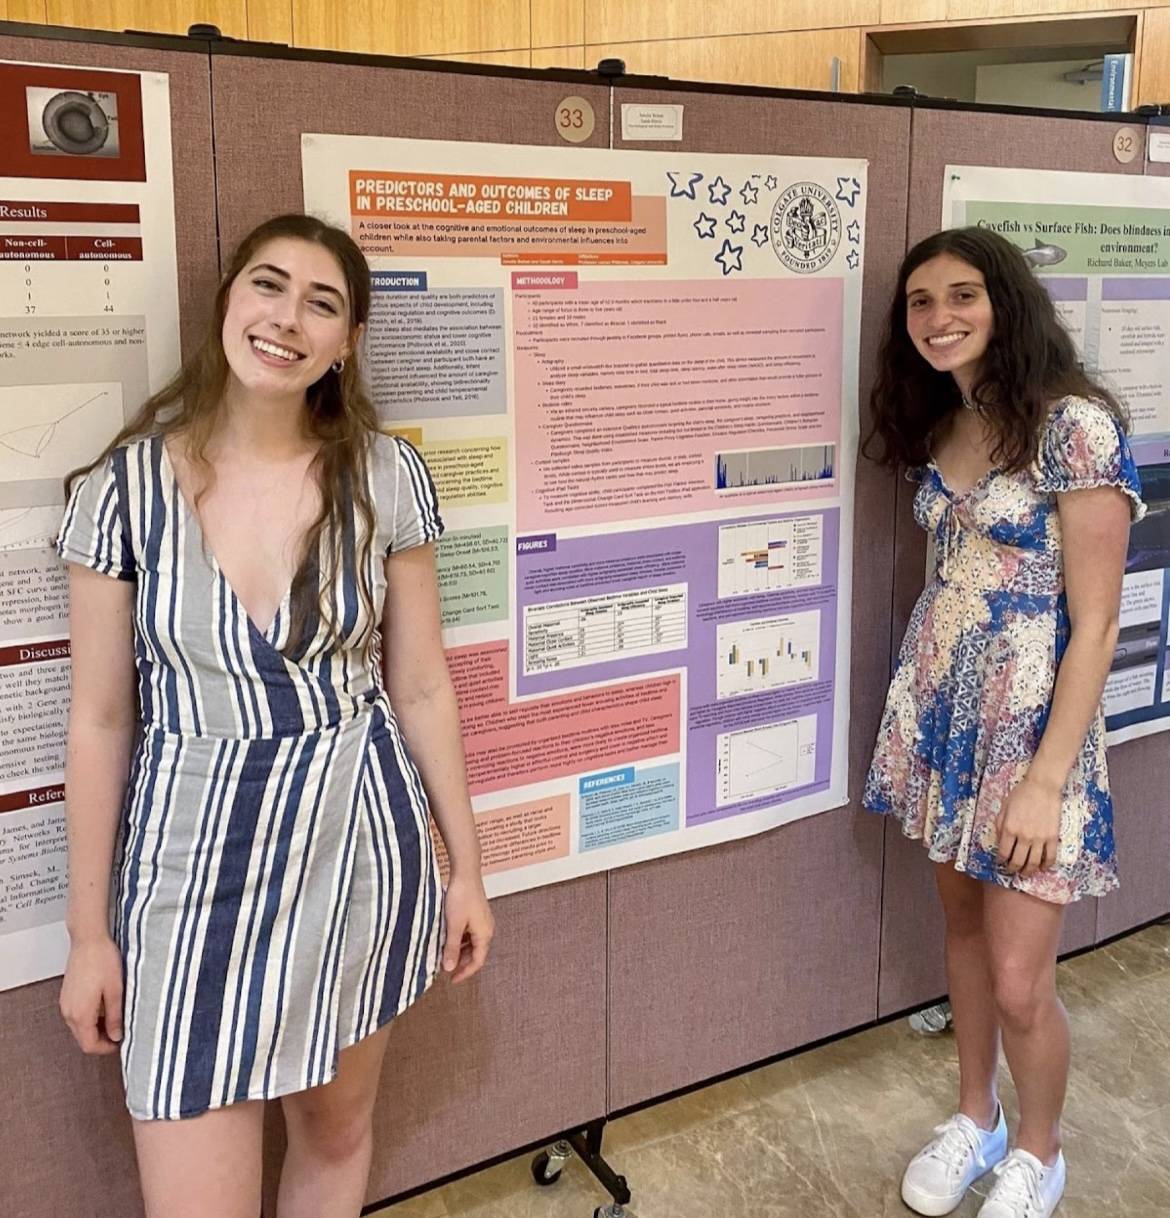 Sarah Harris (right) and Amelia Bohan (left) presenting their research